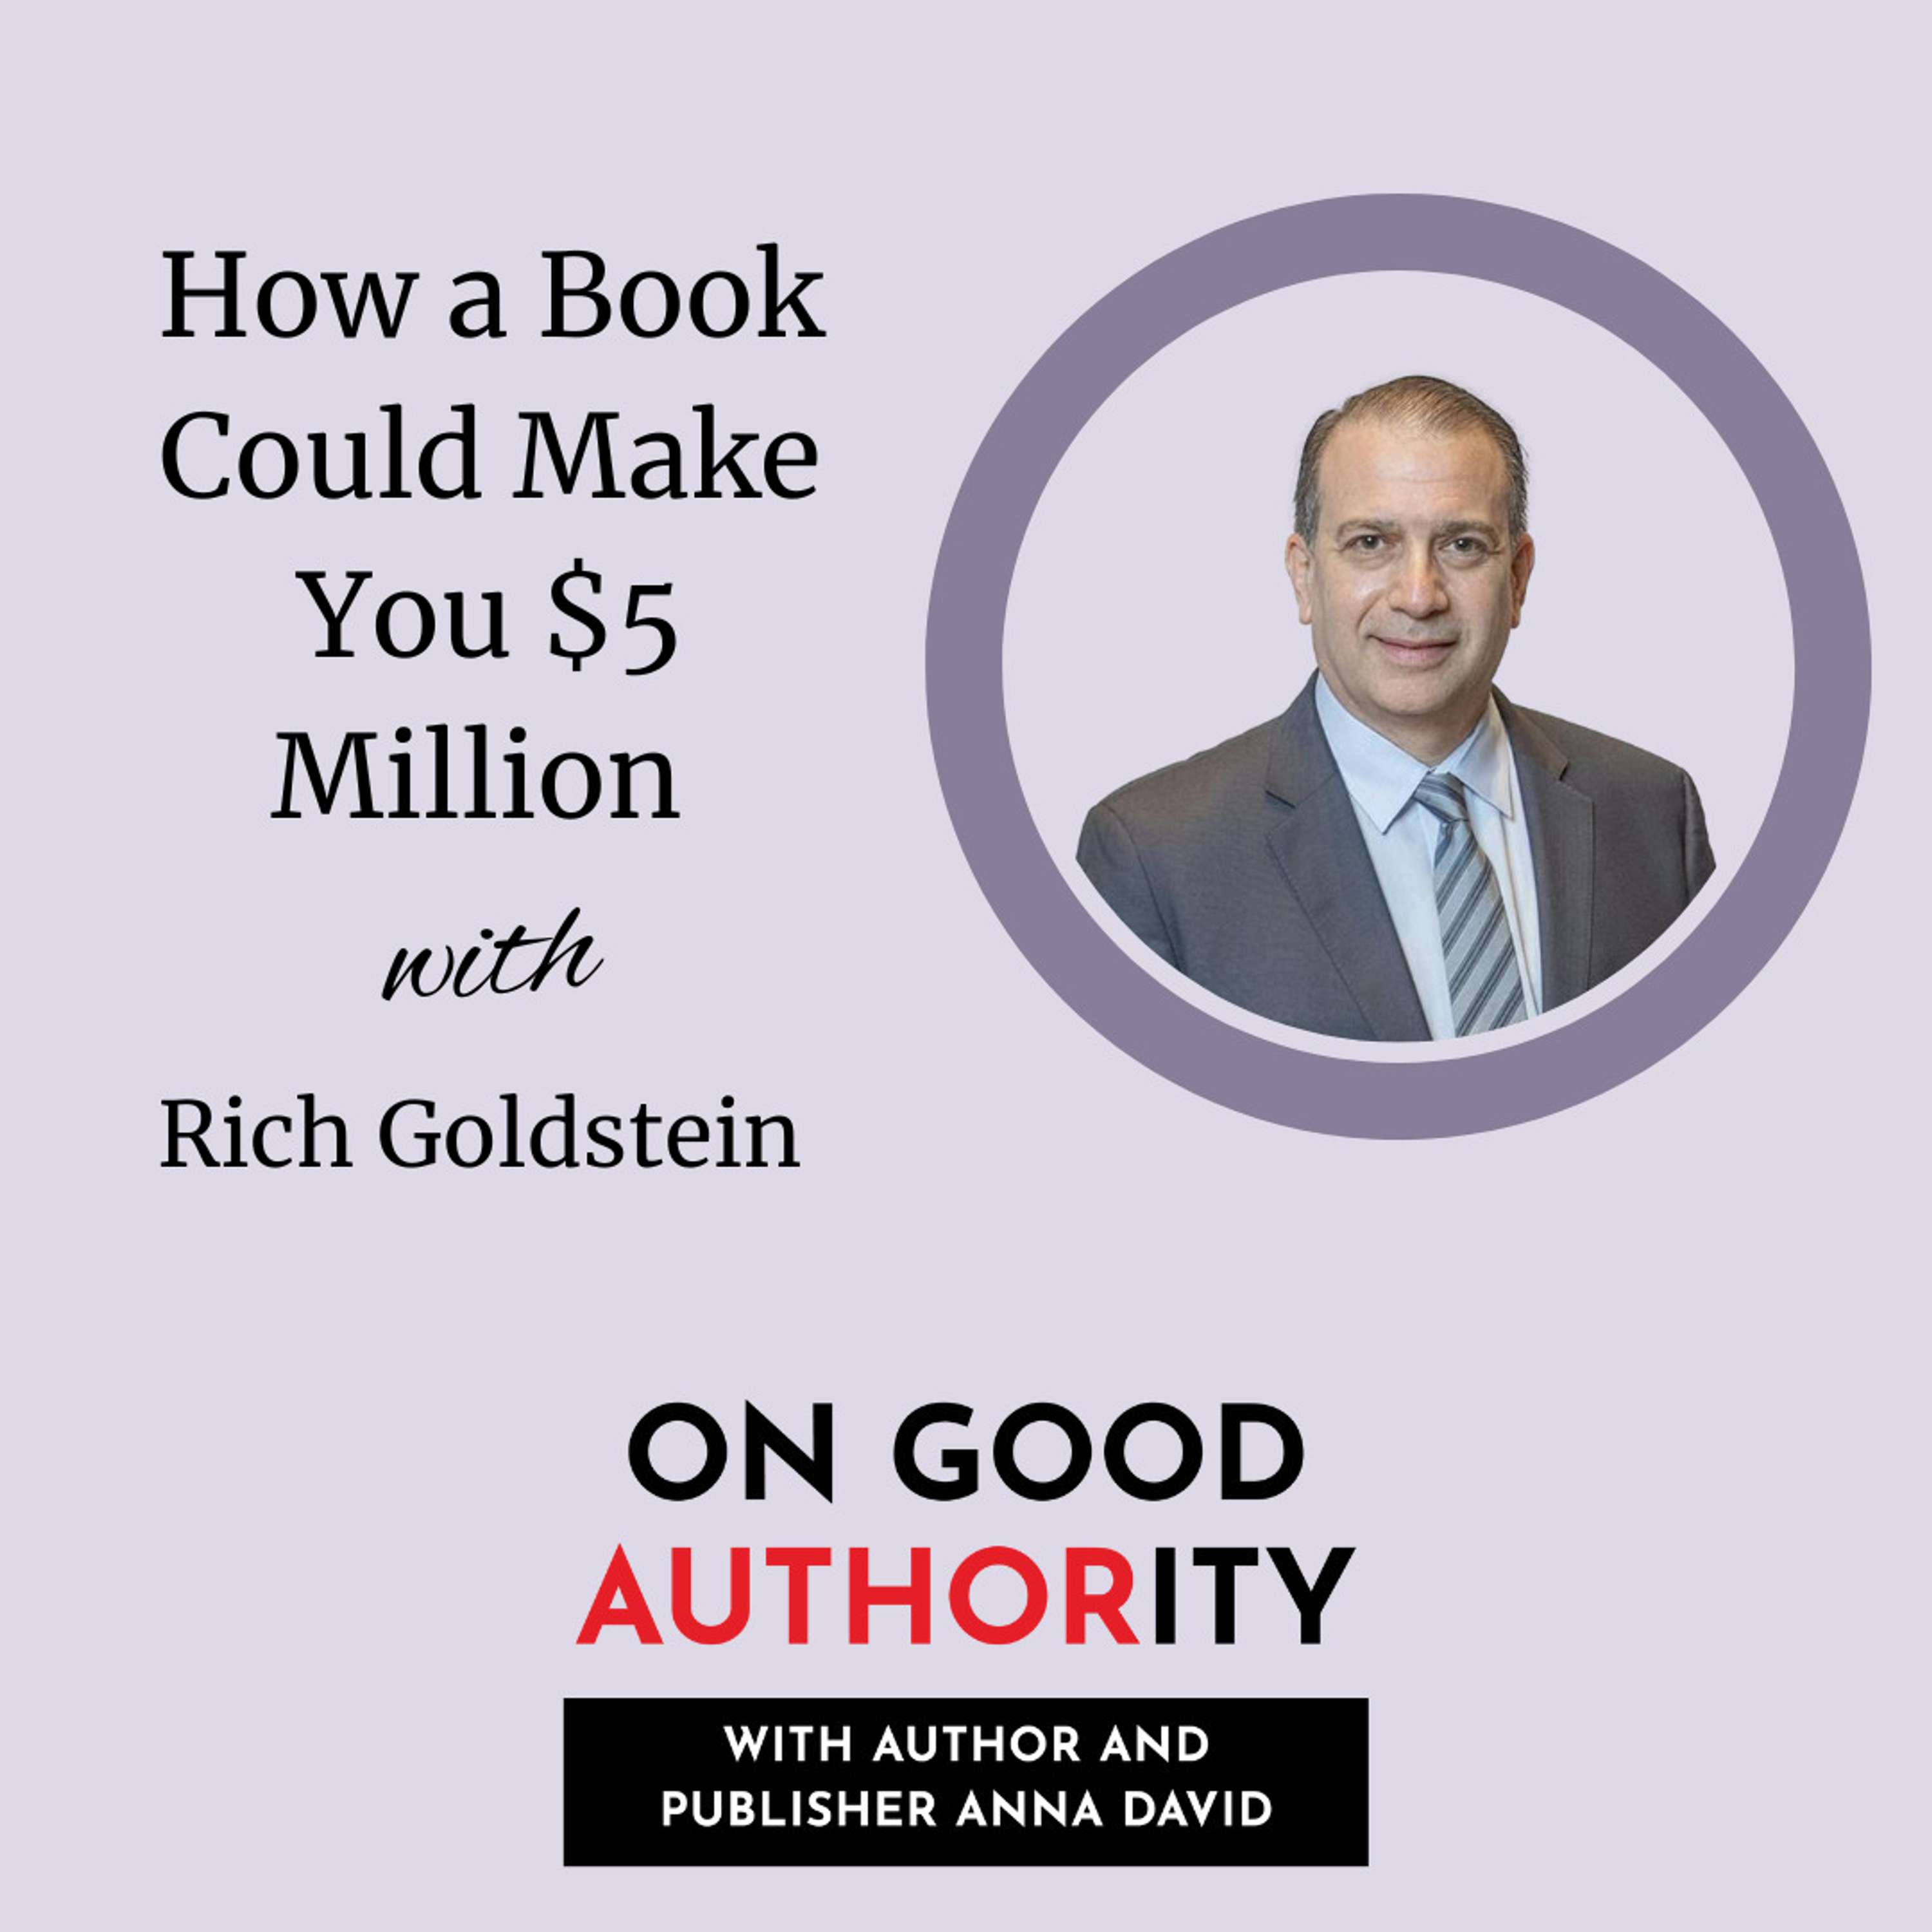 How a Book Could Make You $5 Million with Rich Goldstein